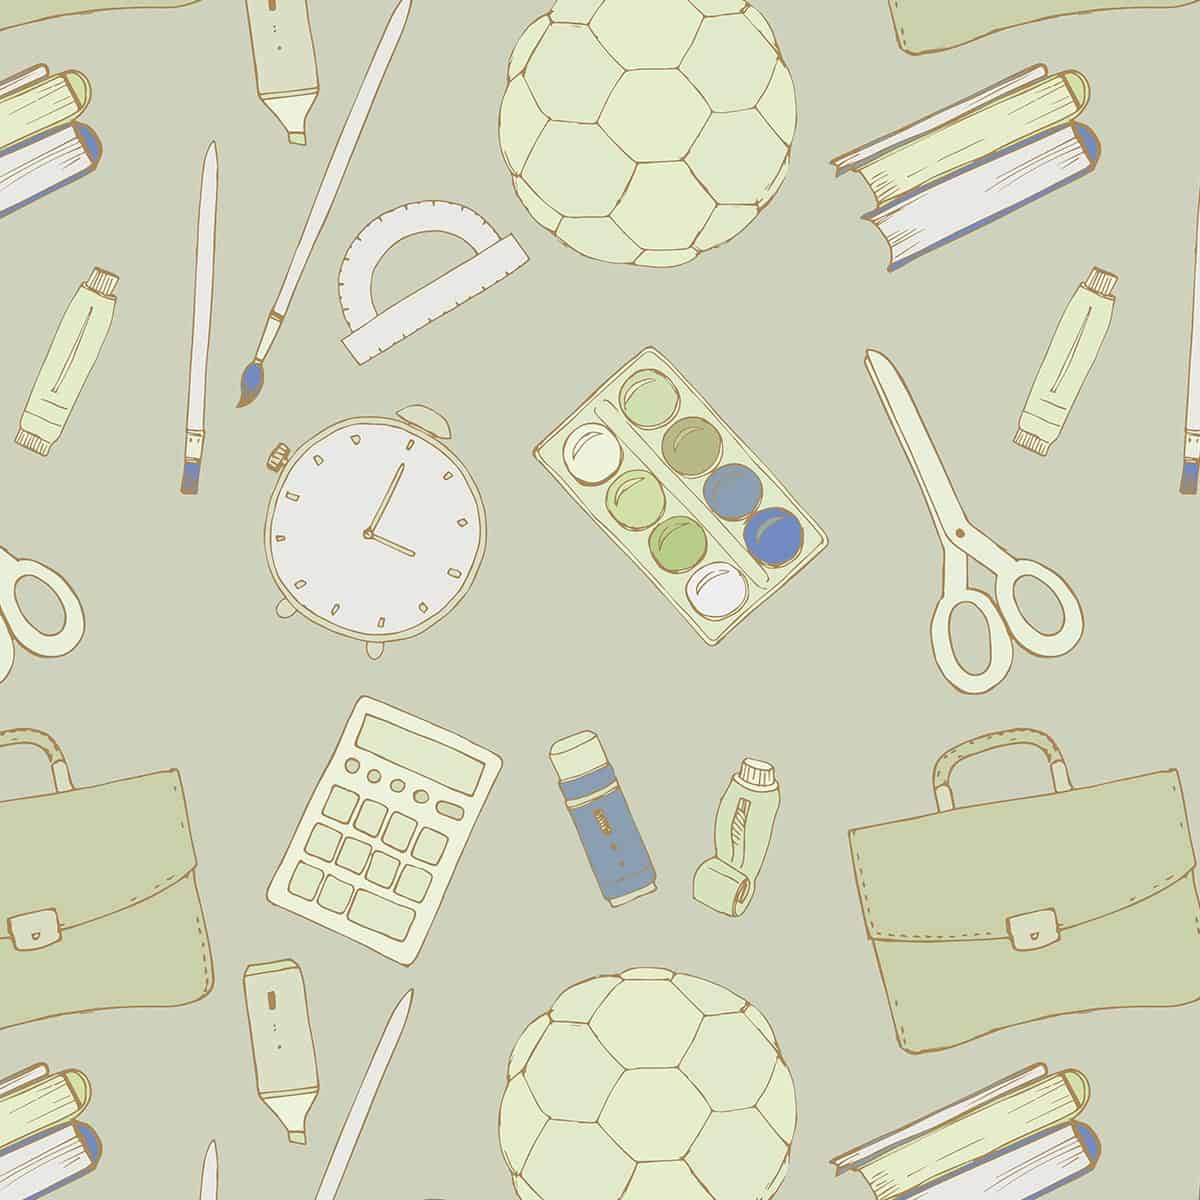 Tools for Adventure, Kids Wallpapers for Rooms, Green